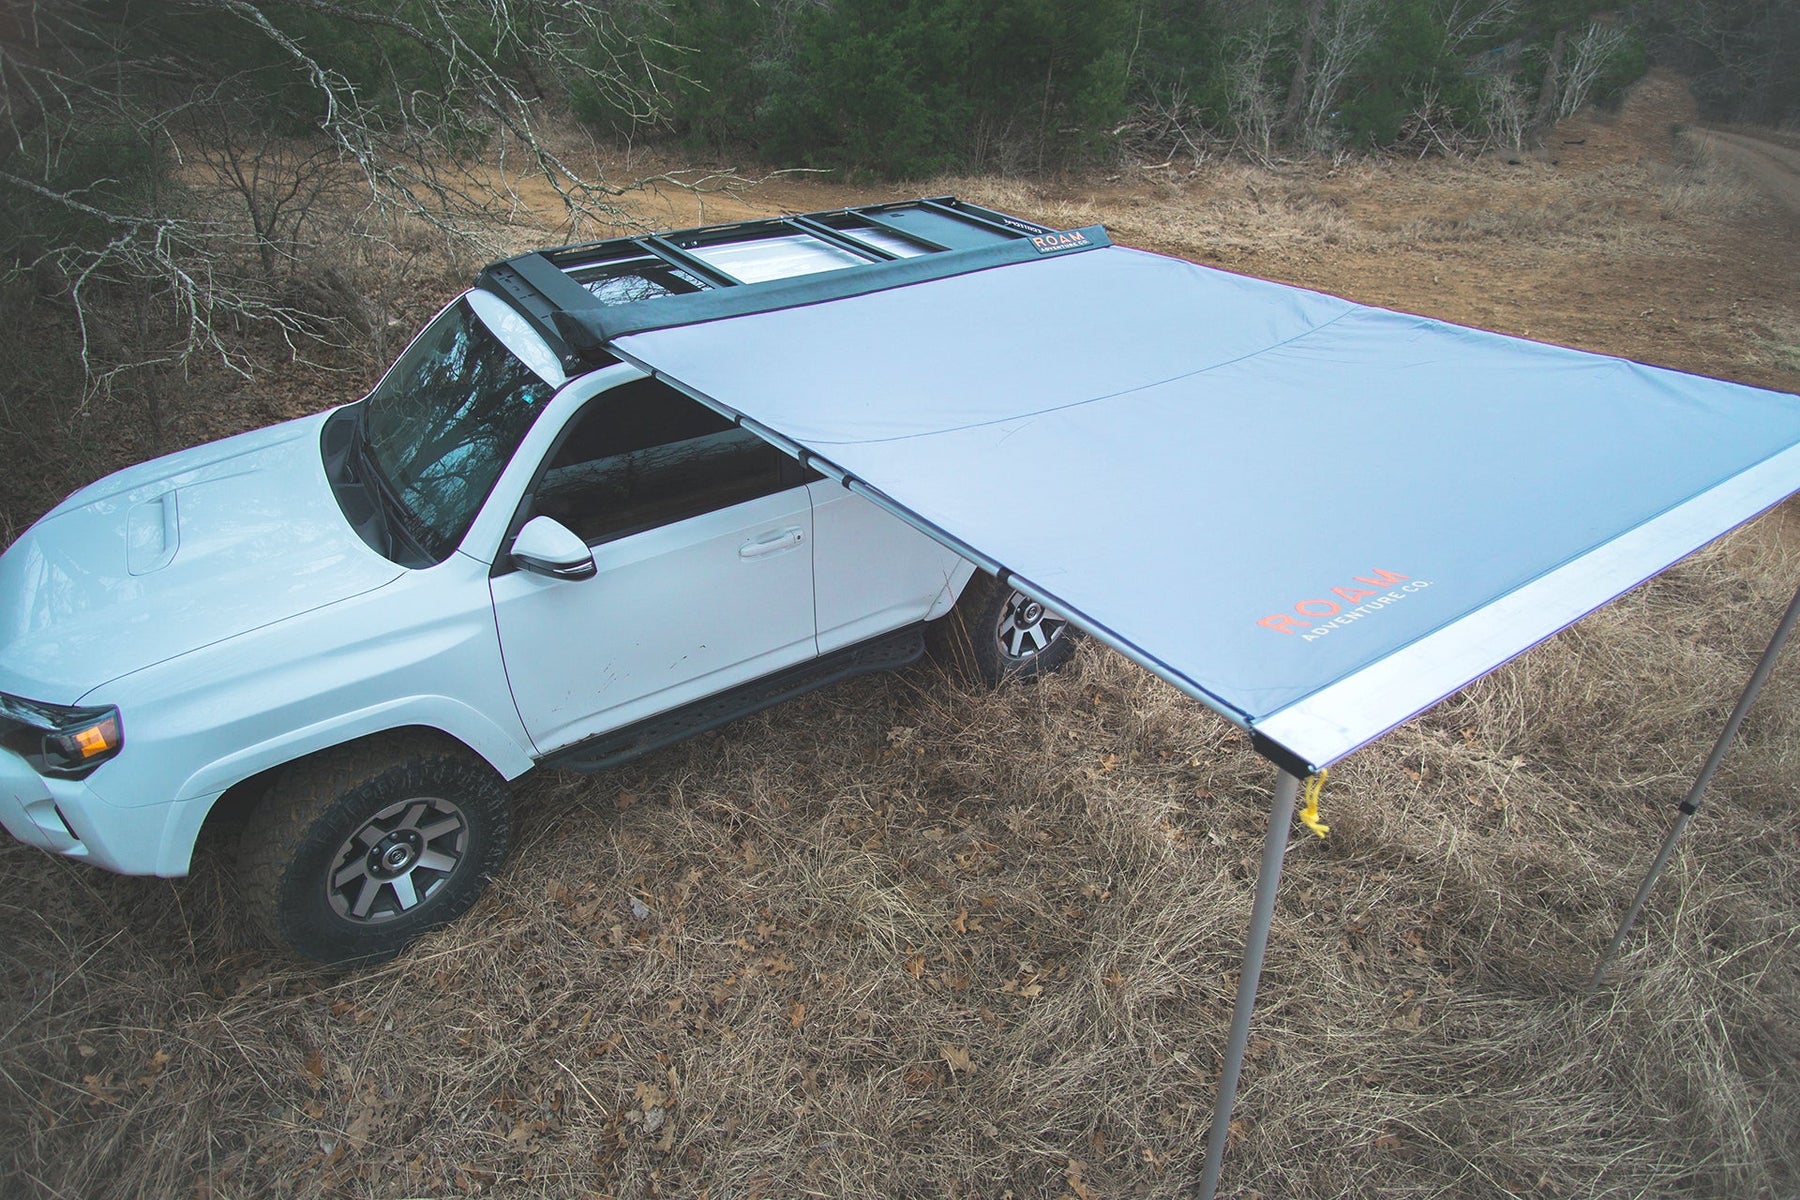 Wide rooftop awning shown on a Toyota 4Runner